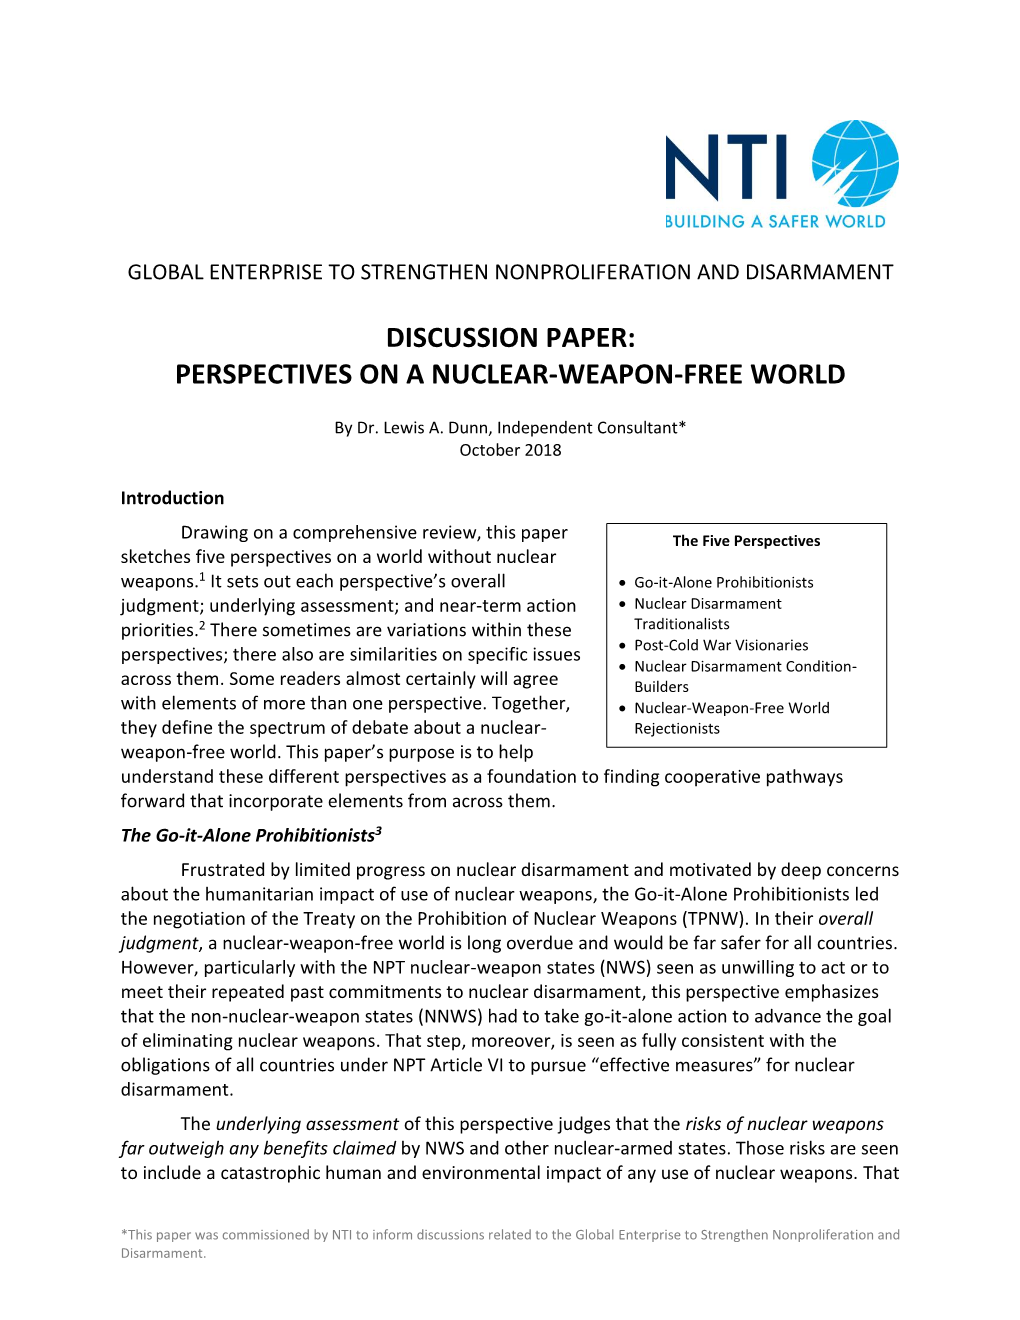 Perspectives on a Nuclear-Weapon-Free World